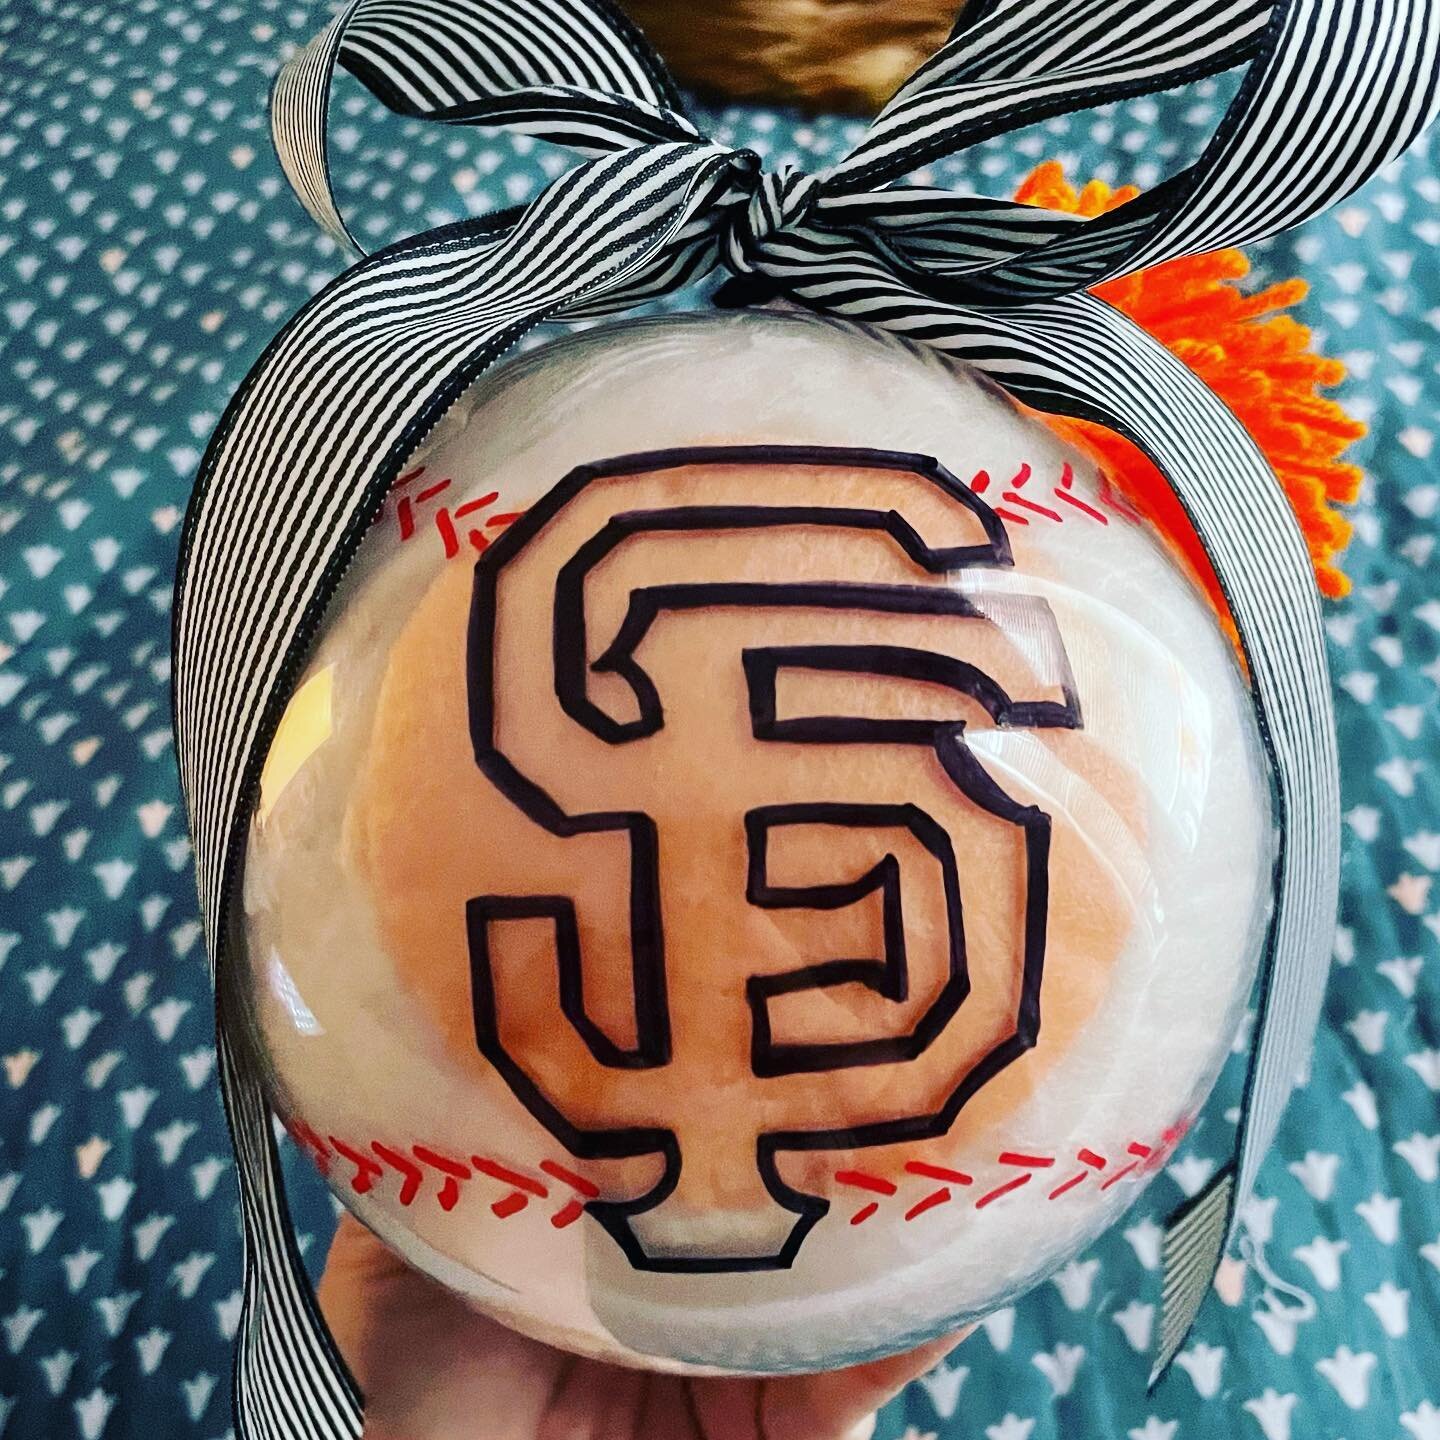 Unfortunately we failed to take a nice picture of this creation, but how cool is this baseball orb?!?! It contains 8 servings of cotton candy as well!  Took some trial and error, but we think we nailed it in the end! Happy Birthday Teri! Good luck to